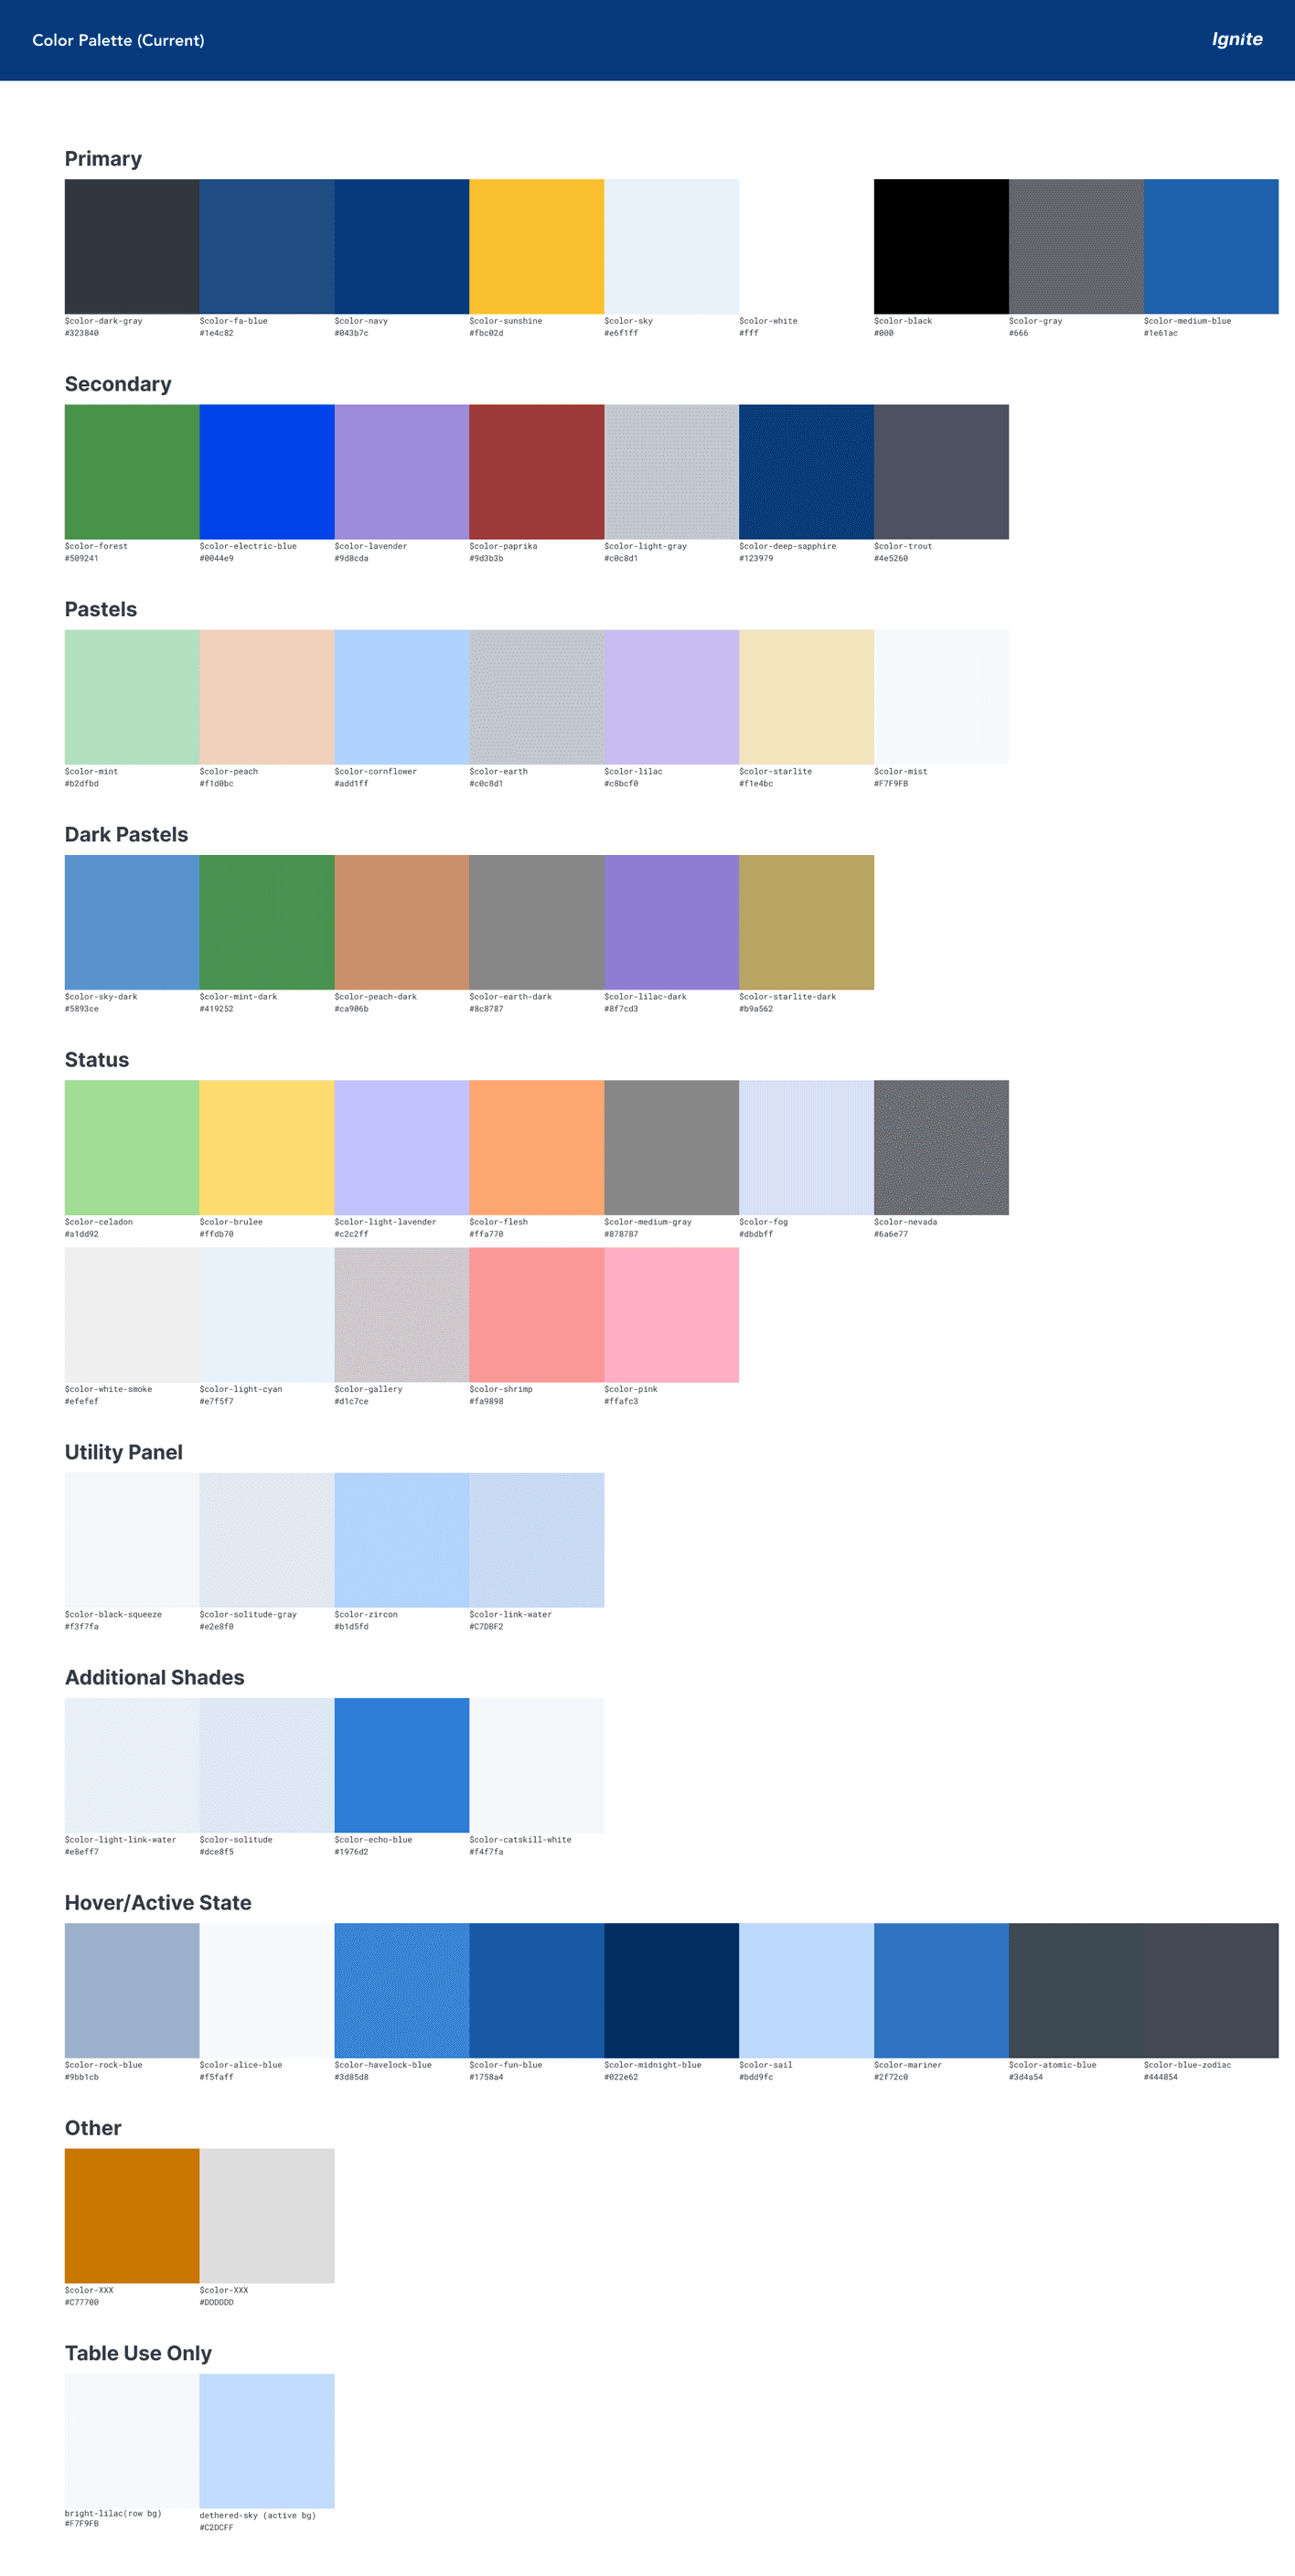 The old color palette. This was what was left after removing lightly-used
and almost-identical colors. This color palette lacked flexibility and
accessible pairing options.